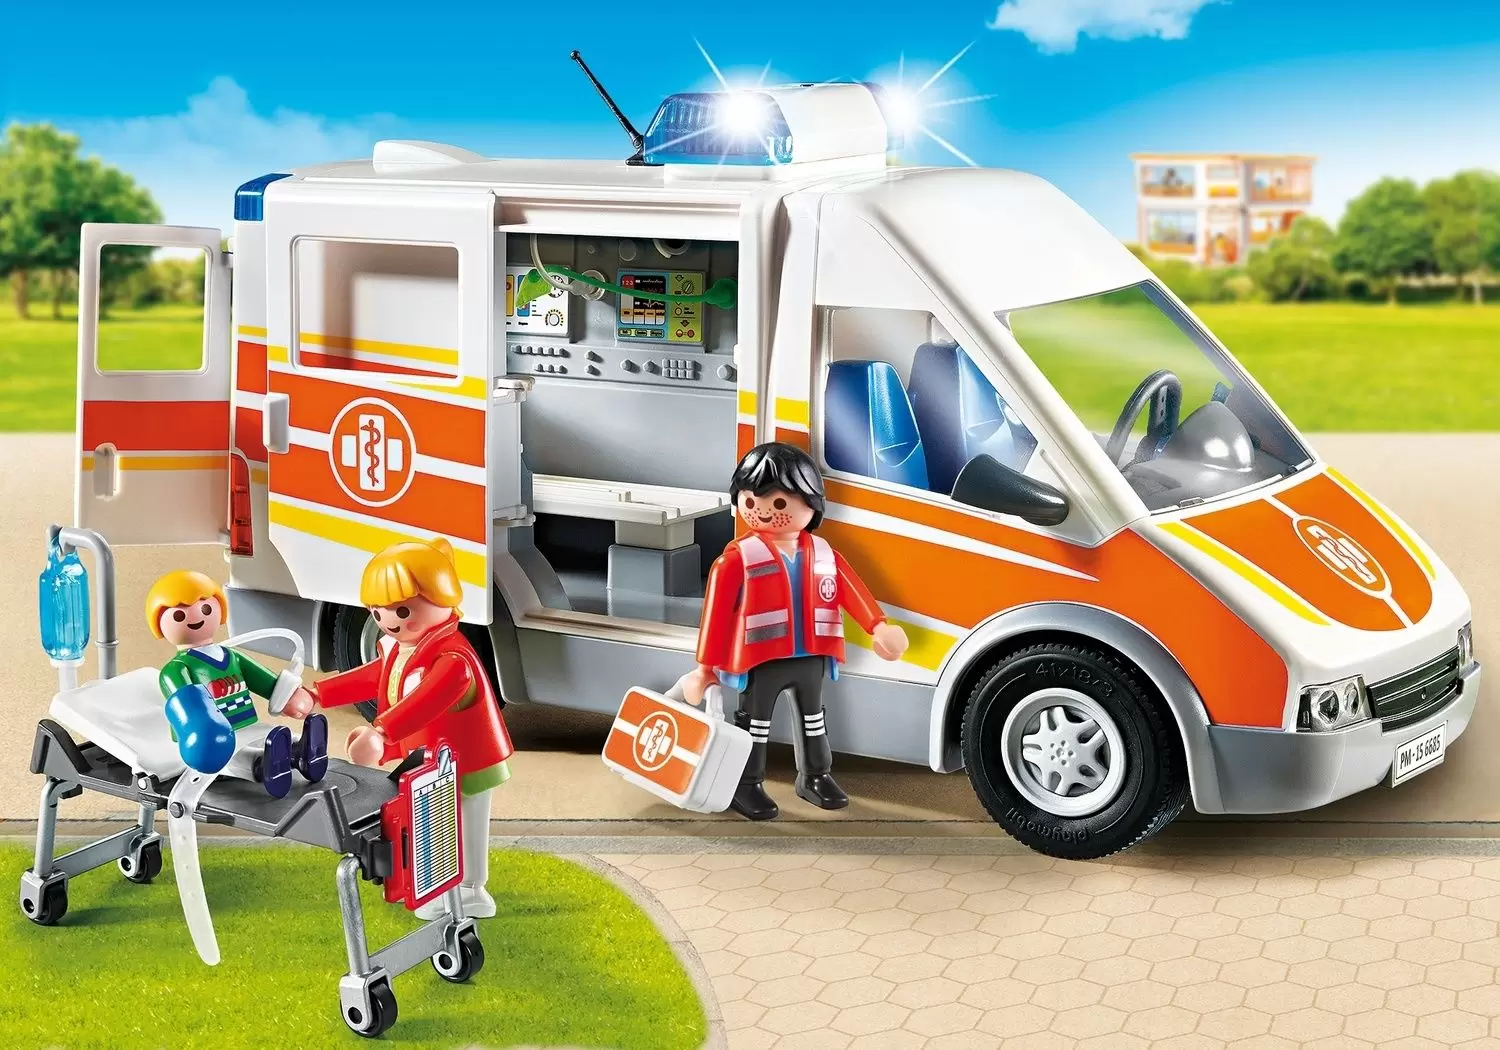 Ambulance with Lights and Sound - Playmobil Rescuers & Hospital 6685